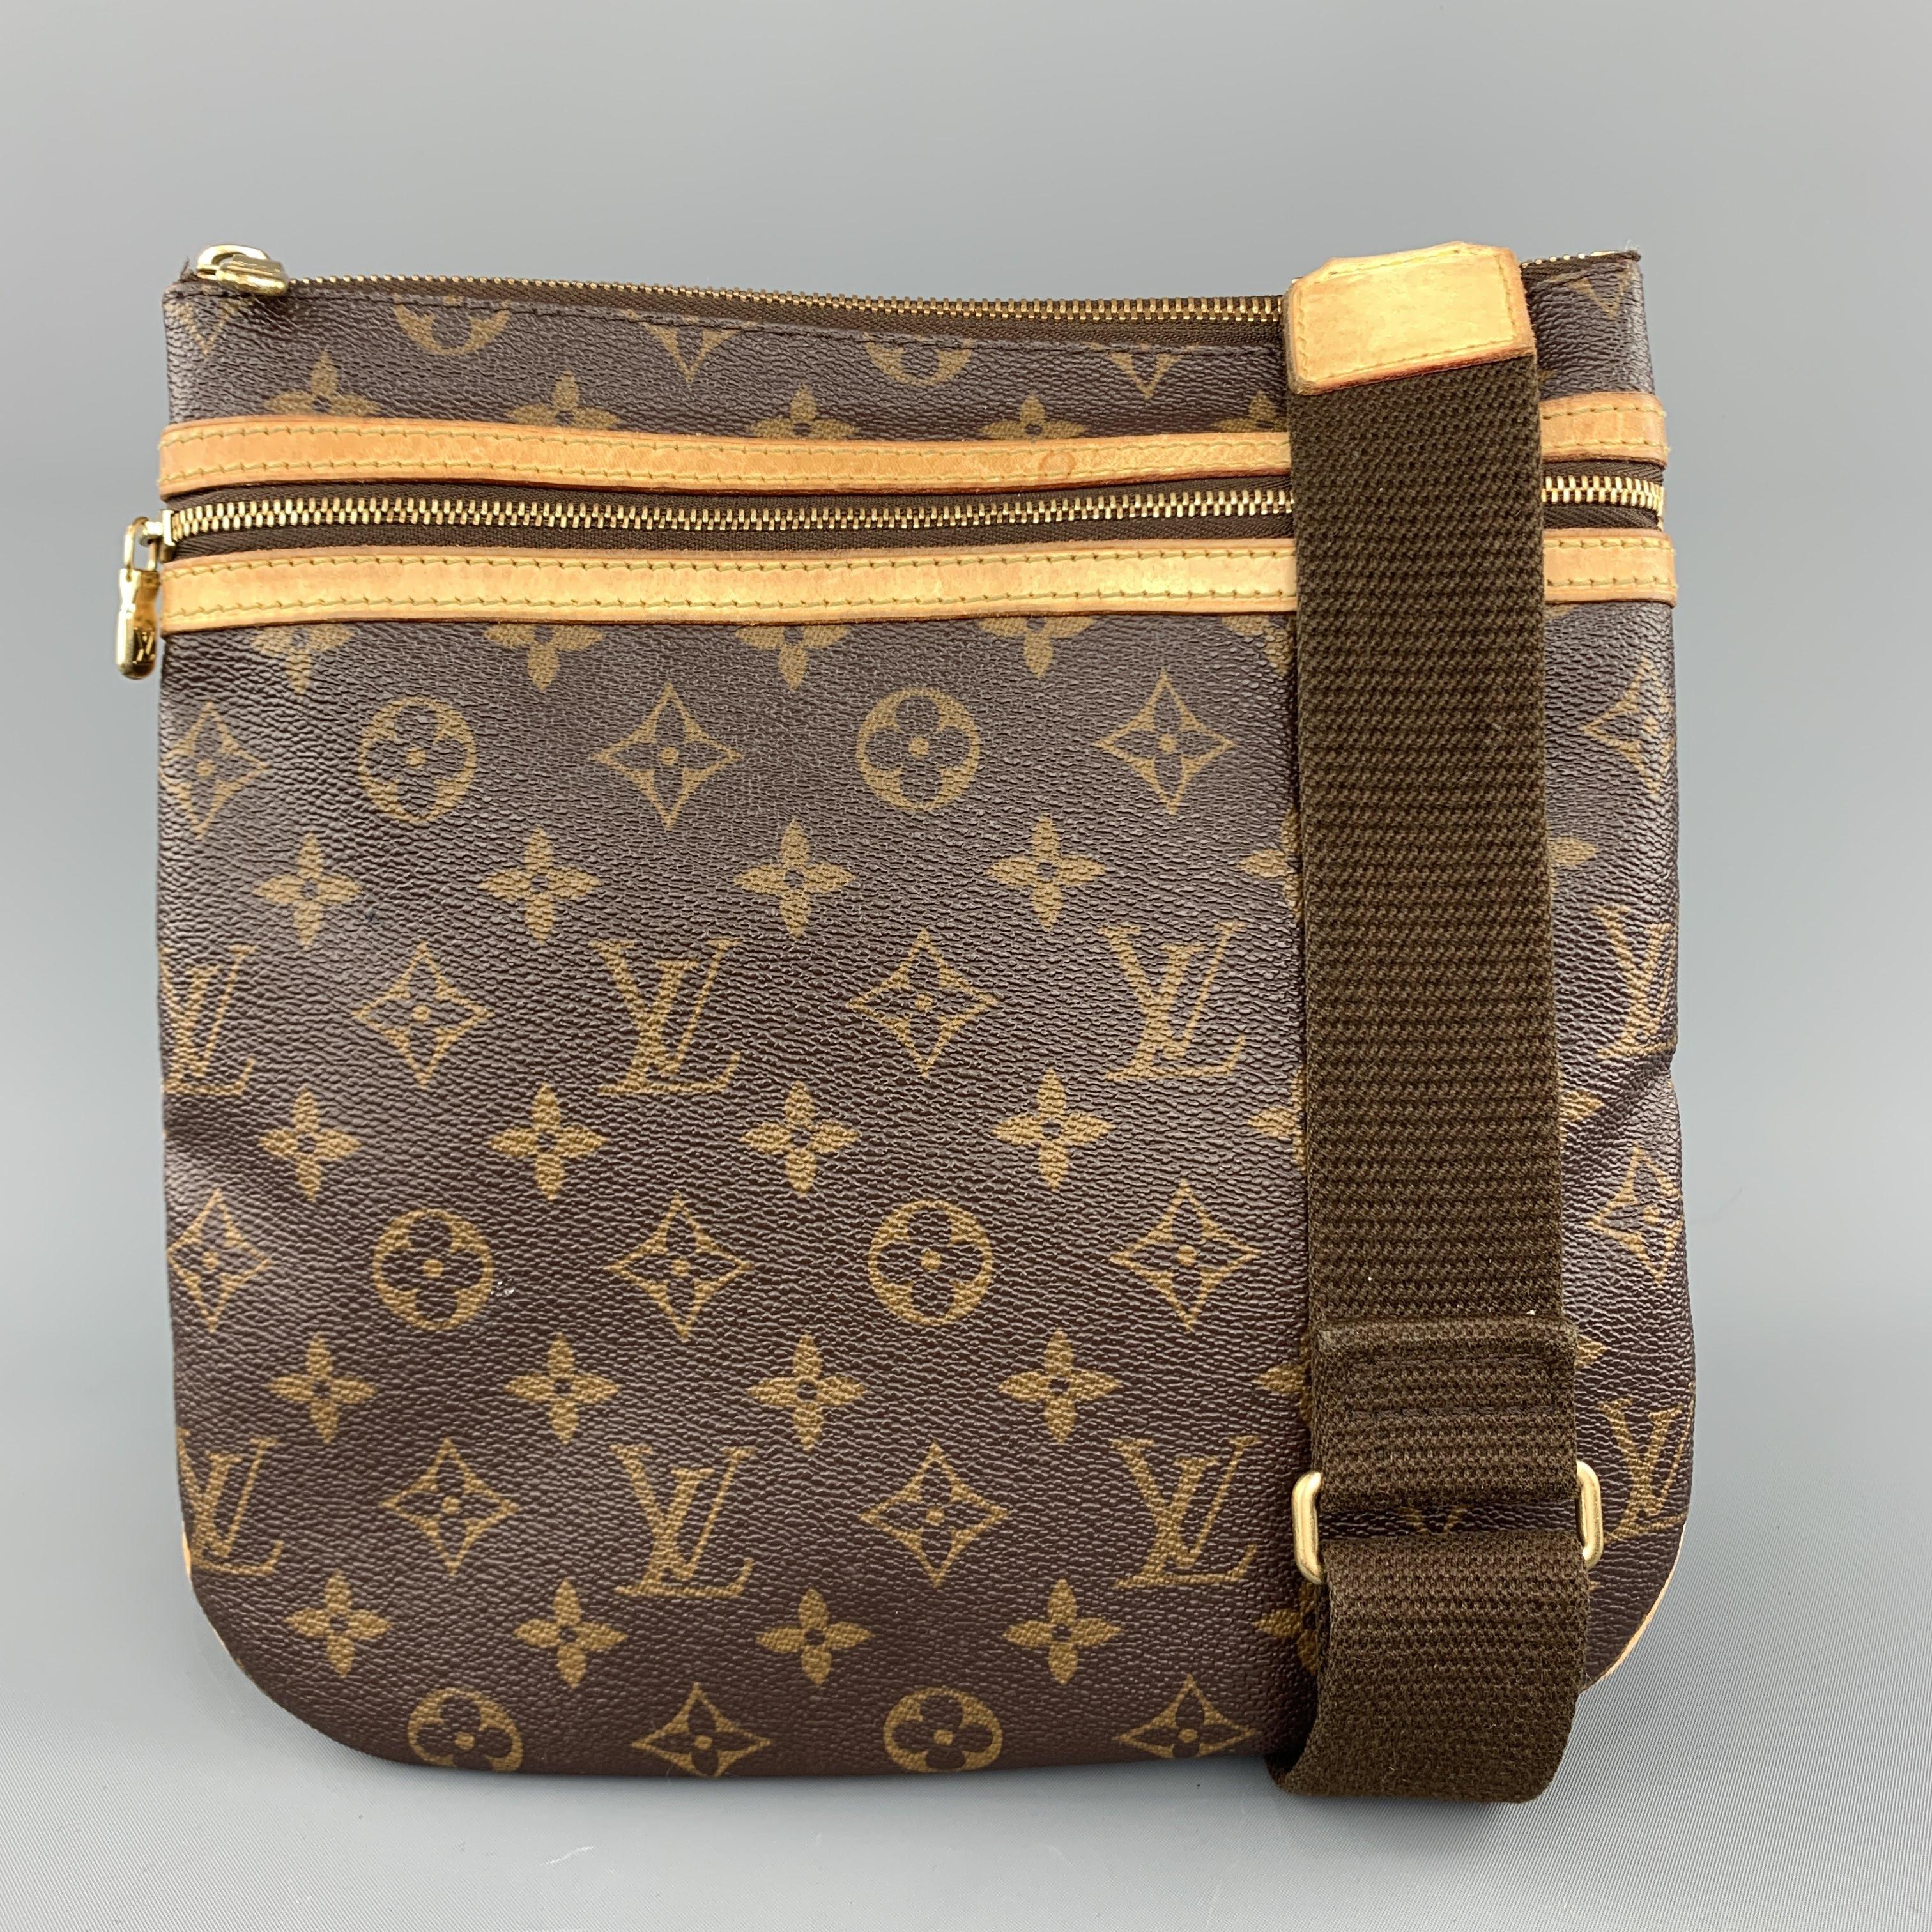 LOUIS VUITTON Pochette Bosphore bag comes in classic monogram coated canvas with vachetta leather trim and webbing crossbody strap. Wear throughout. As-is. With dust bag. Made in France.
 
Good Pre-Owned Condition.
Marked: MI 1006
 
Measurements:
